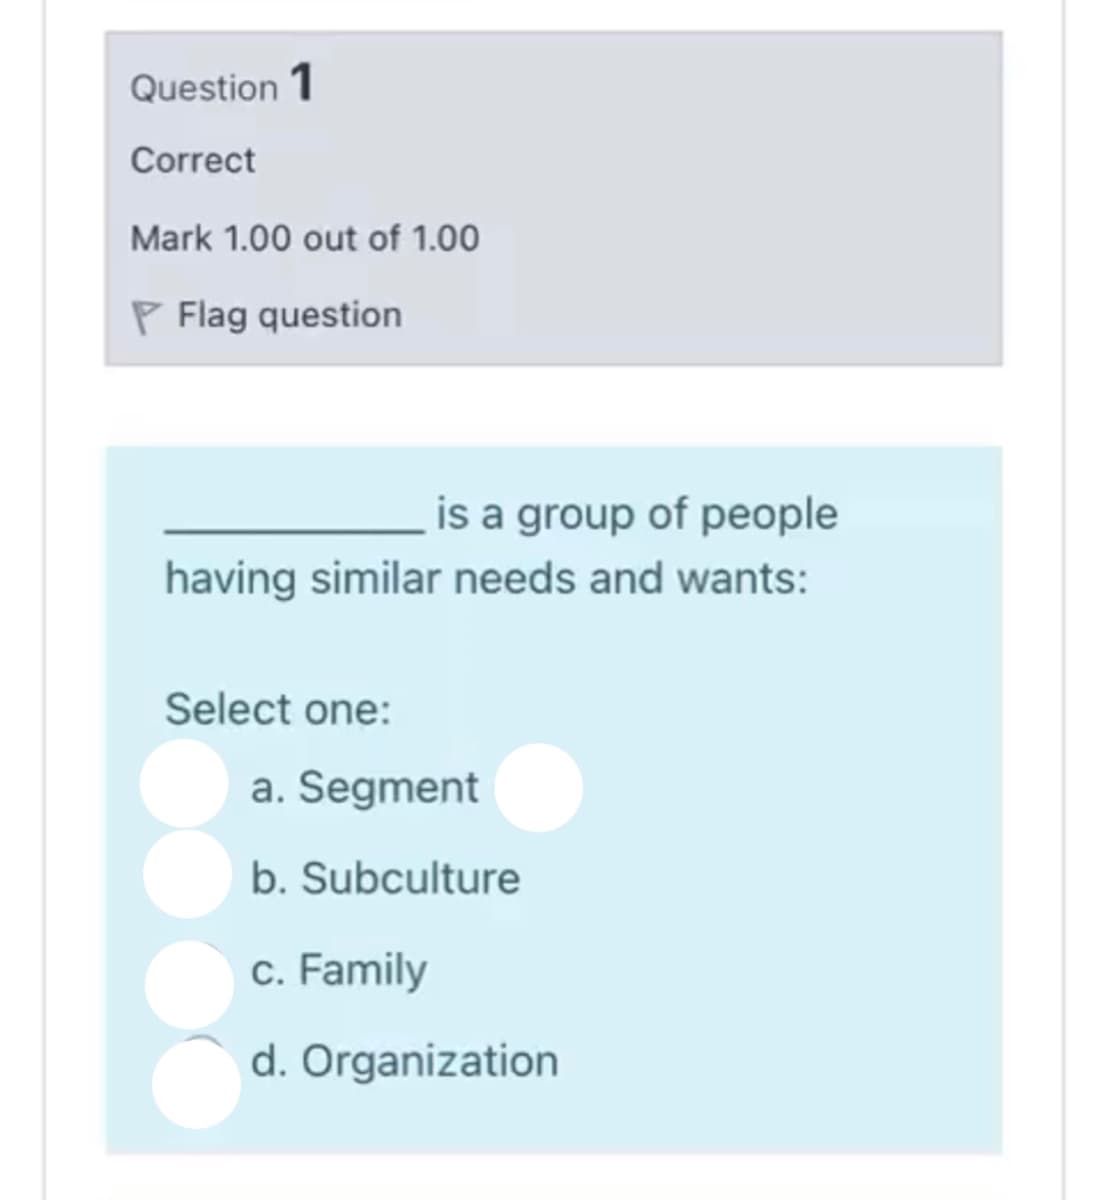 Question 1
Correct
Mark 1.00 out of 1.00
P Flag question
is a group of people
having similar needs and wants:
Select one:
a. Segment
b. Subculture
c. Family
d. Organization
